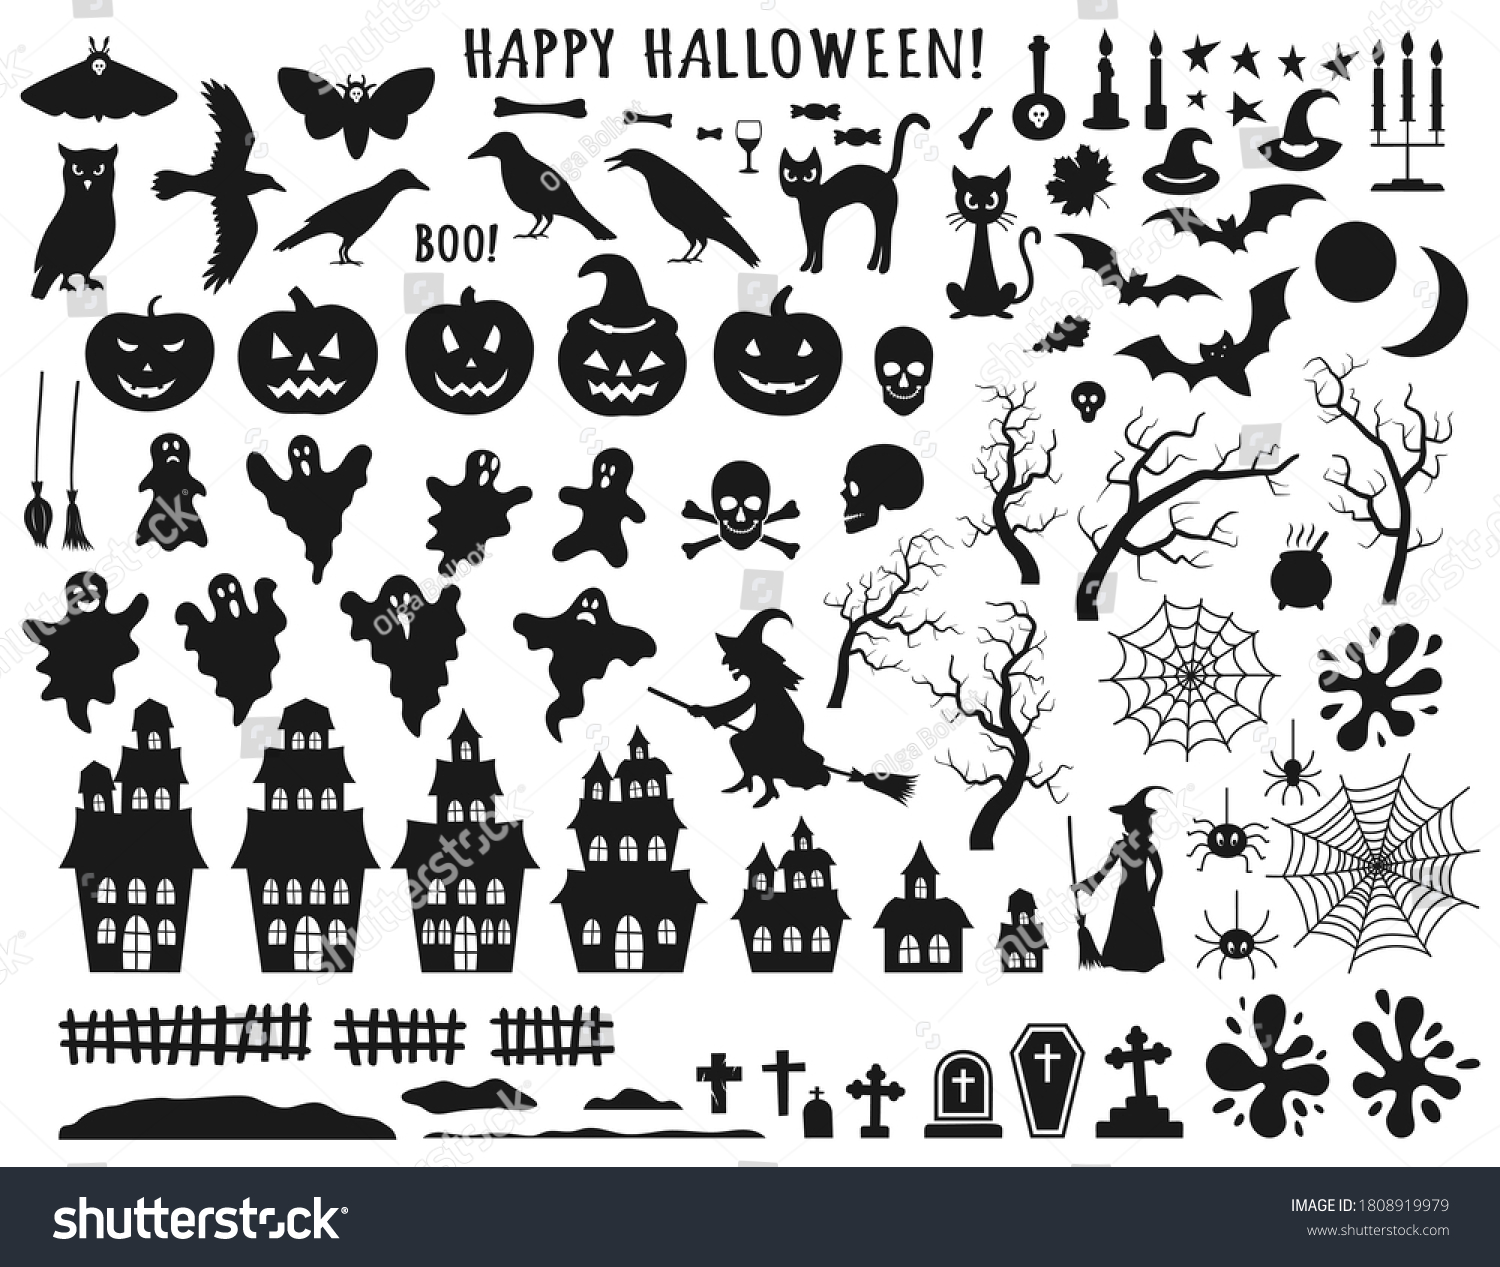 SVG of Set of Halloween black icons with witch, cat, raven, hat, ghosts, bats, candle, pumpkin, spider, cobweb, skull and bones. Vector illustration in flat style isolated  over white background svg